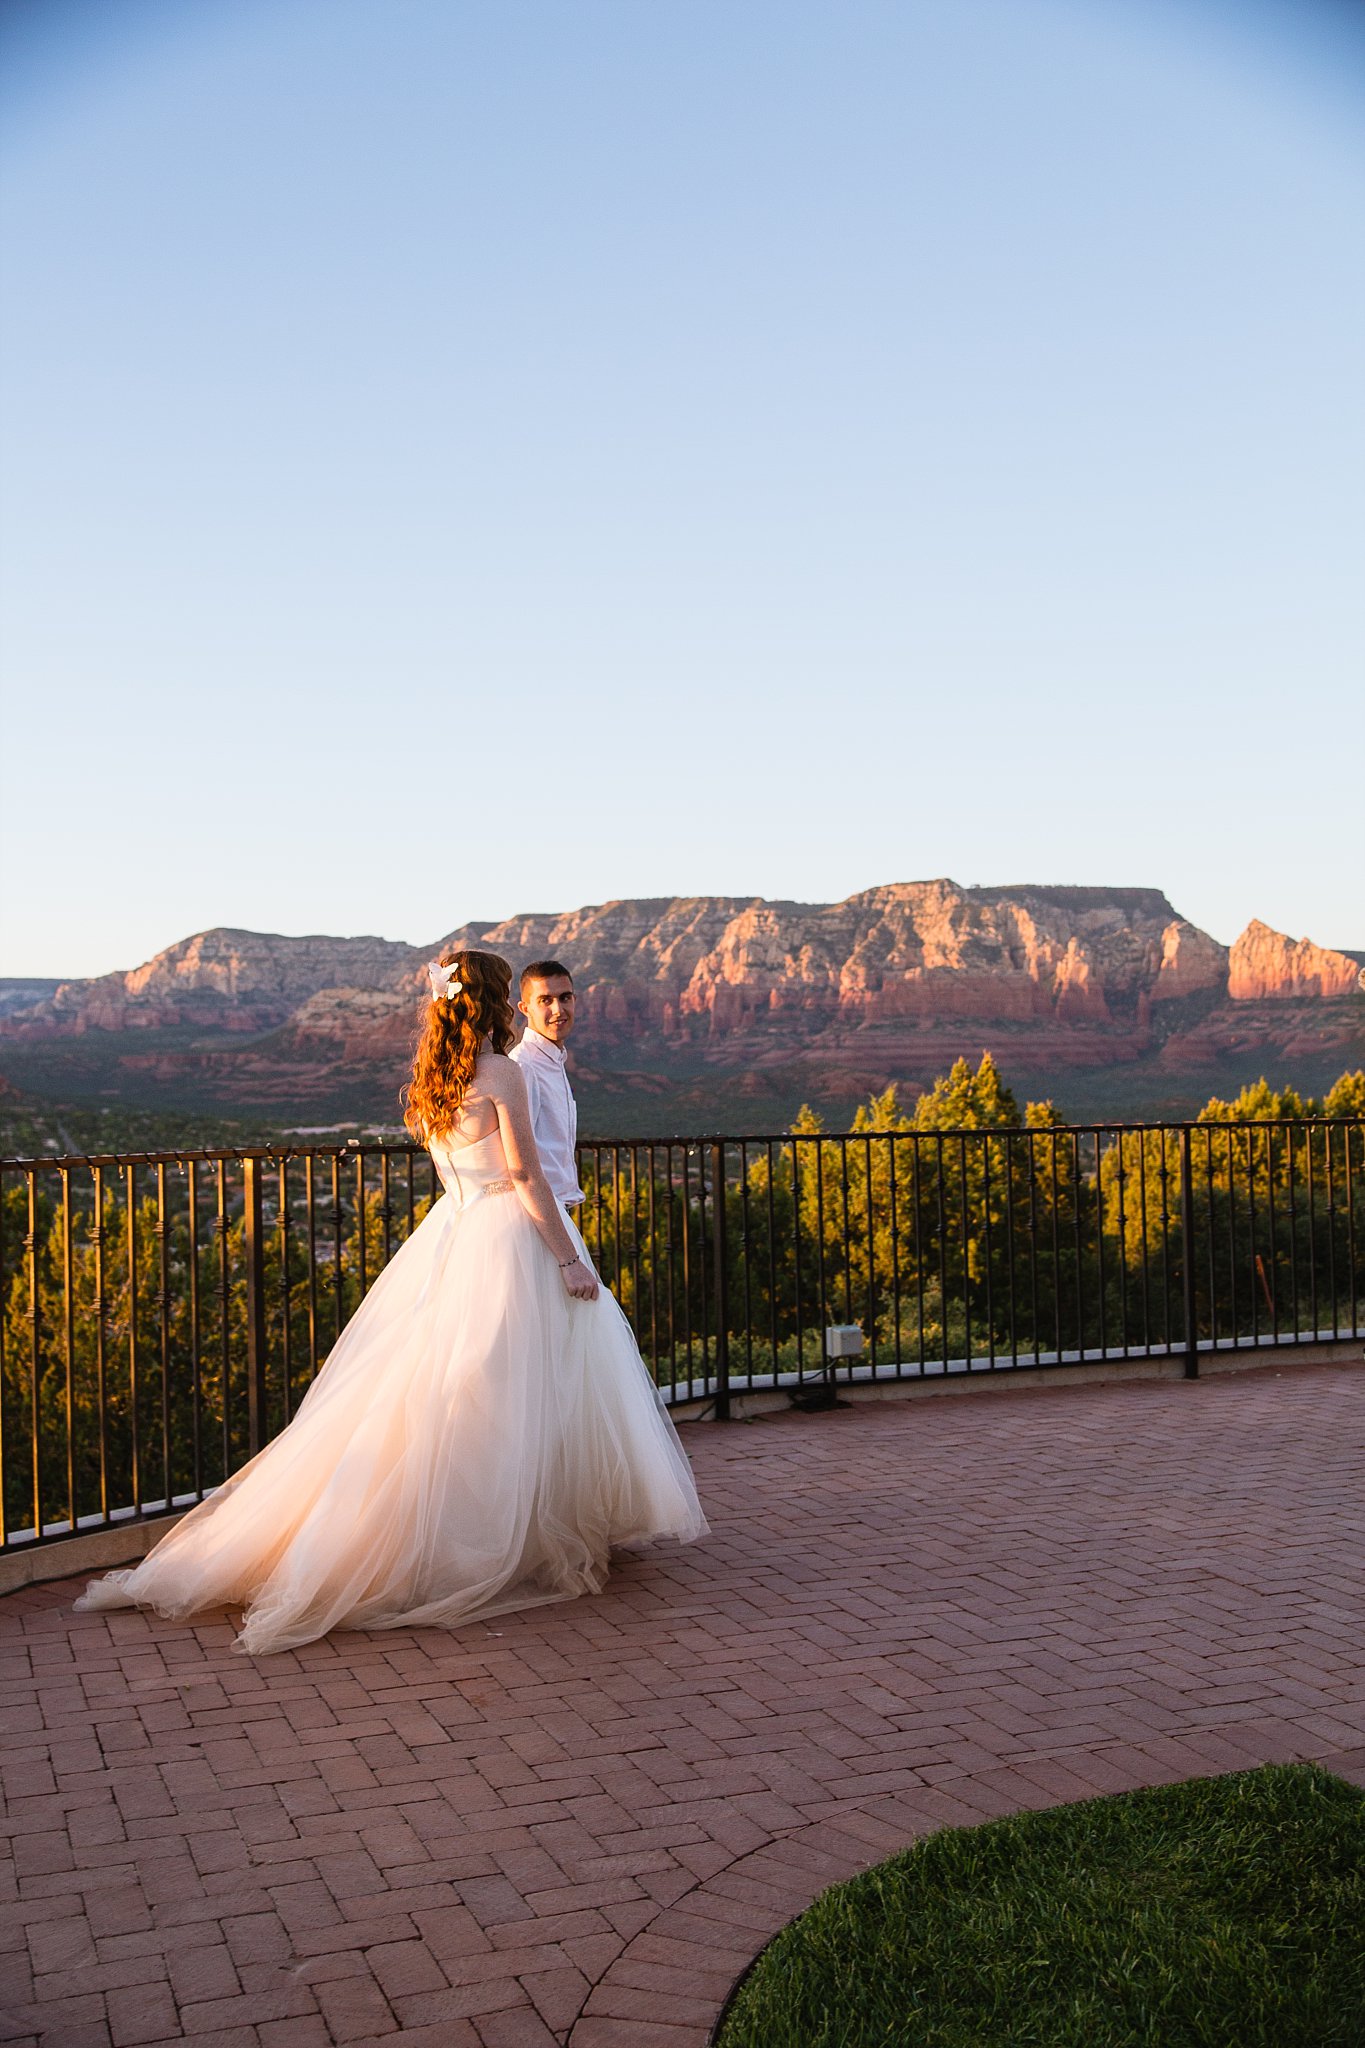 Bride and groom walking together during their Sky Ranch Lodge wedding by Sedona engagement photographer PMA Photography.